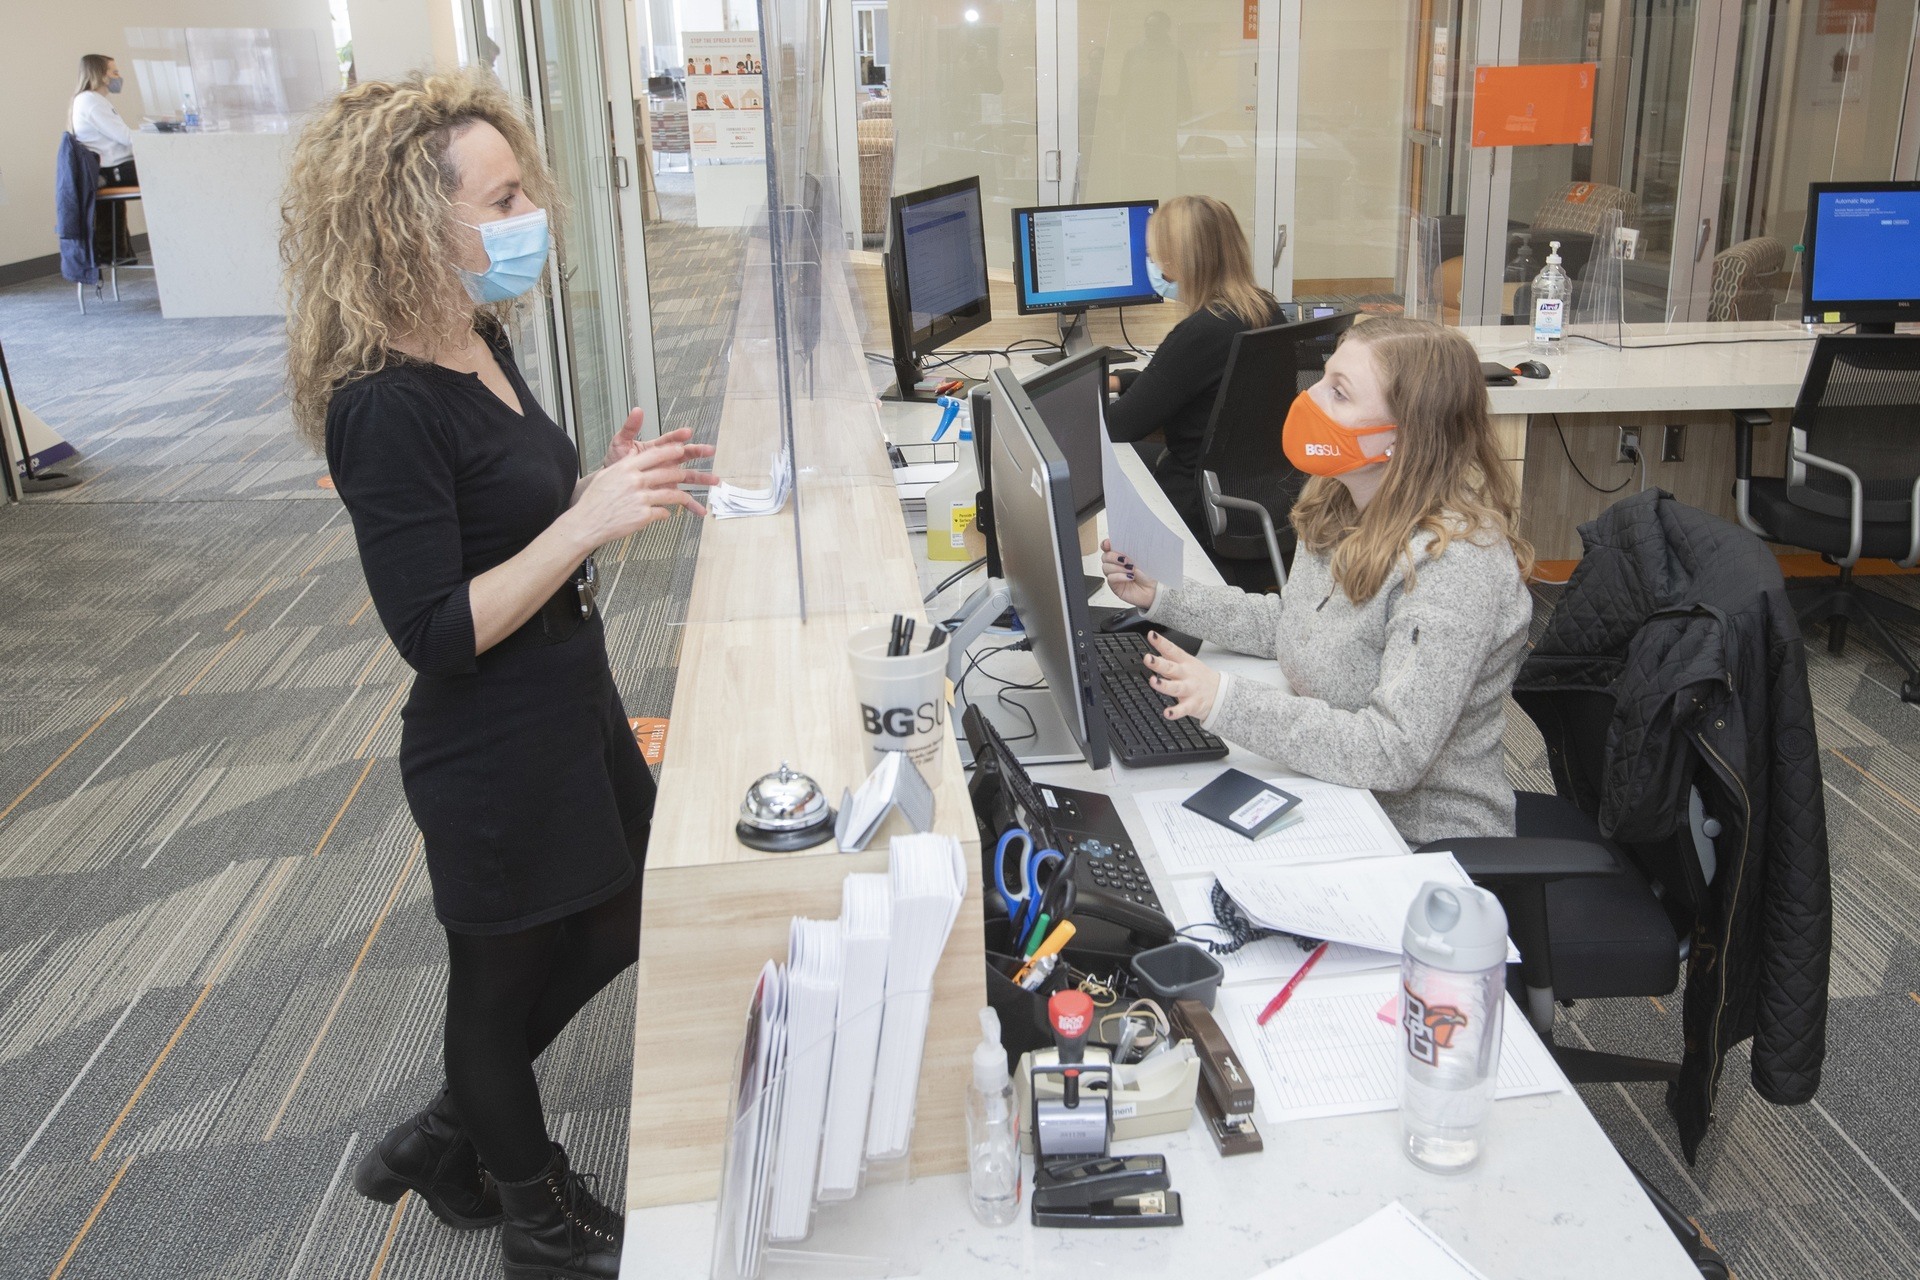 A female wearing a facemask speaks through plex-glass to a masked female employee at the BGSU Career Center.